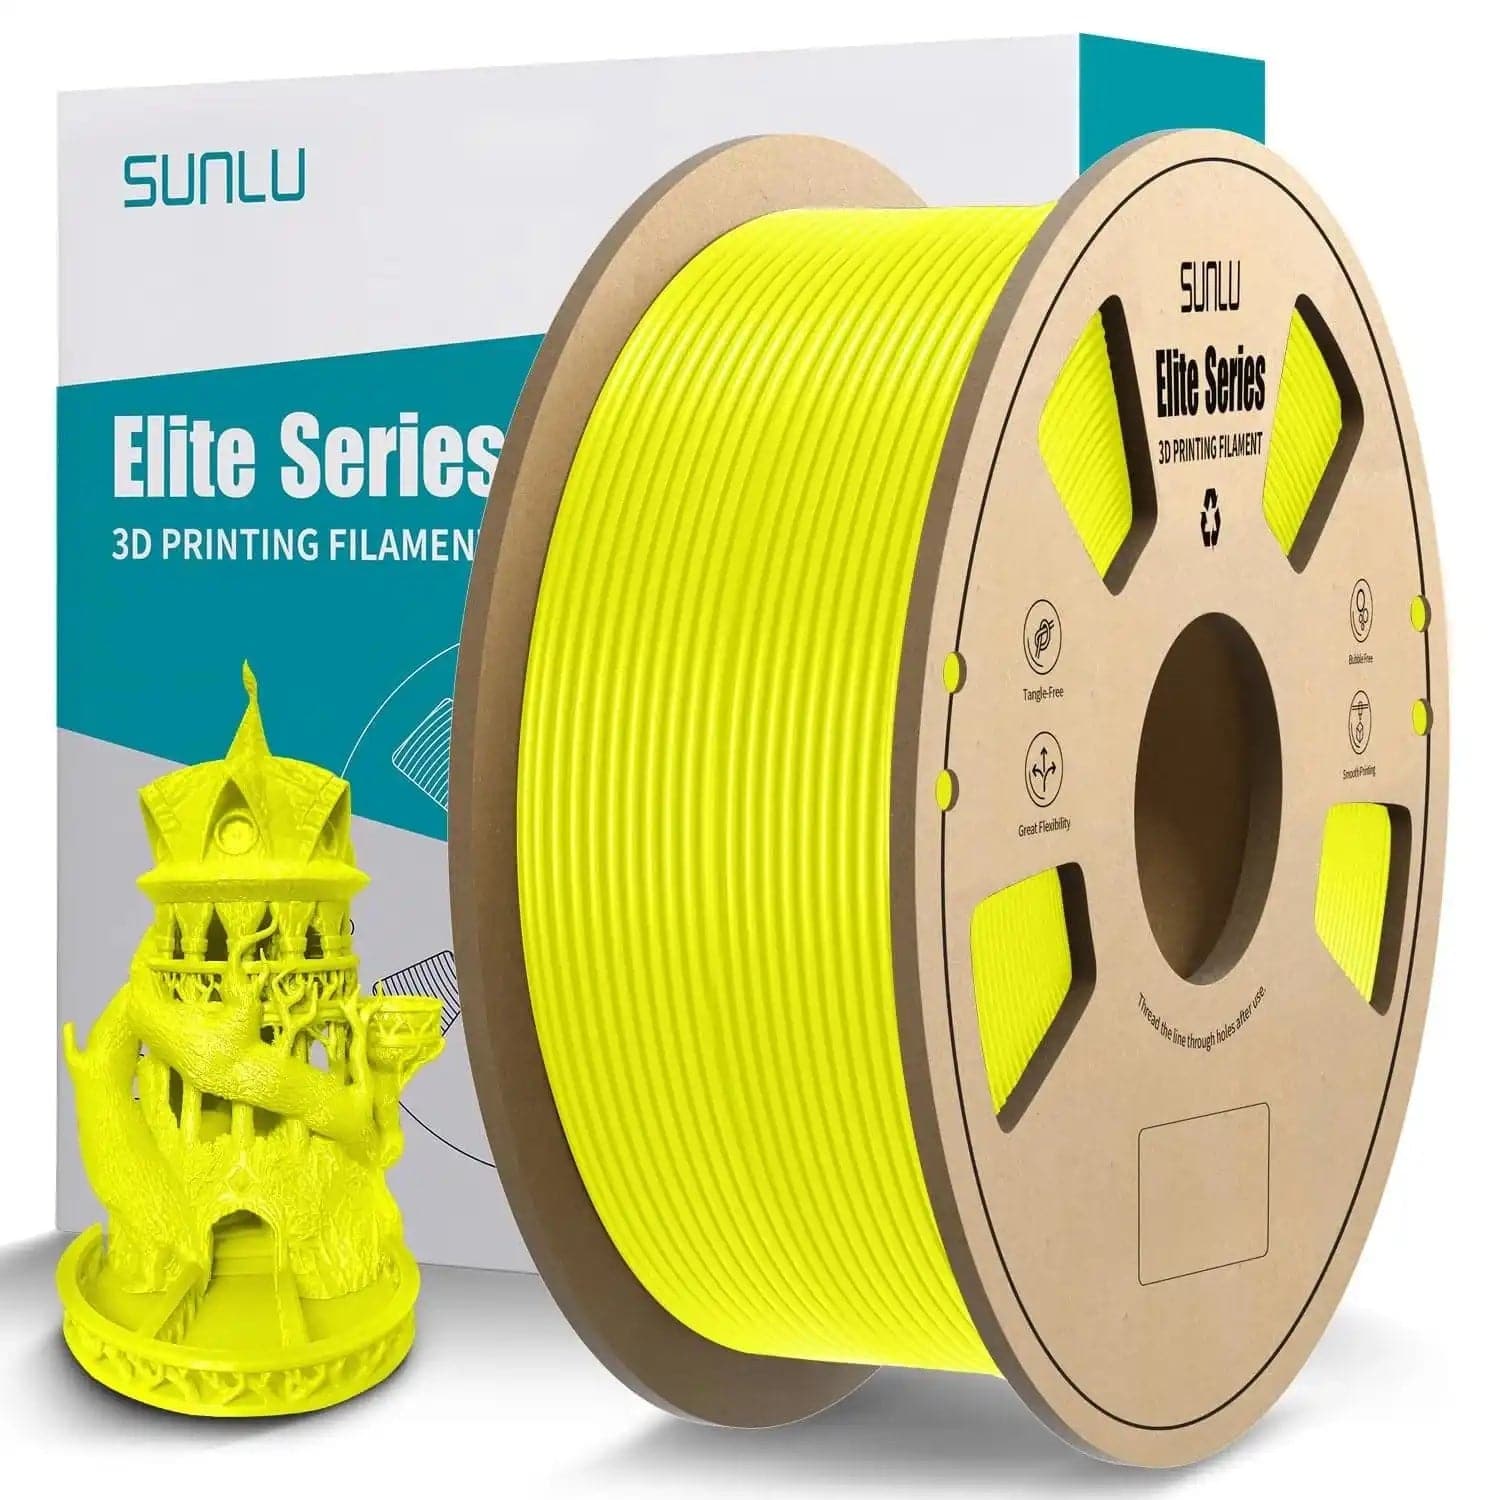 SUNLU Elite PLA 3D Printer Filament 1.75mm 1KG Spool (2.2lbs)
✅【Ship From Amazon】Same shipping service with Amazon. Enjoy reliable performance and fast shipping with the Amazon FBA Warehouse.
✅【SUNLU PLA Filament 1.75mm】DimensSUNLU Elite PLA 3D Printer Filament 13D Printing Materials